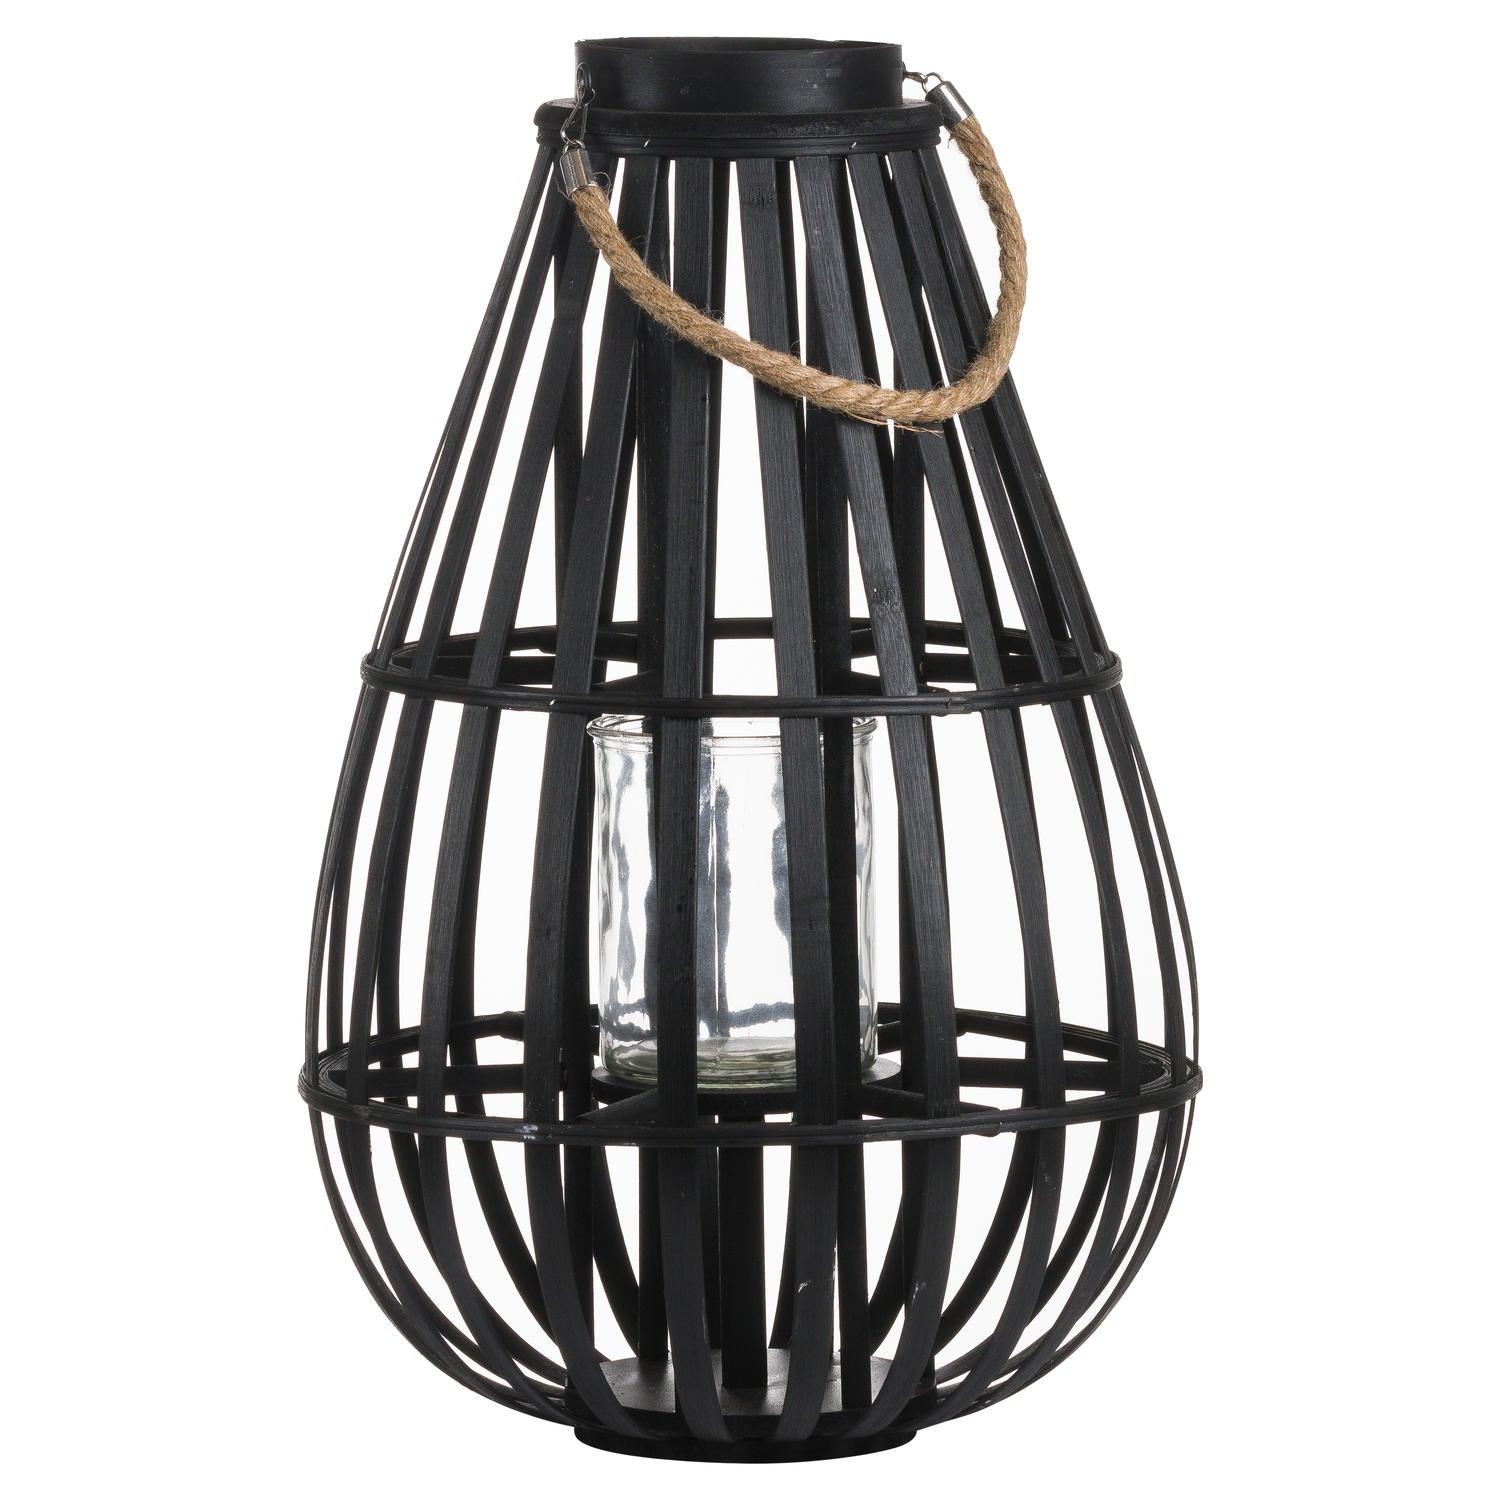 View Floor Standing Domed Wicker Lantern With Rope Detail information